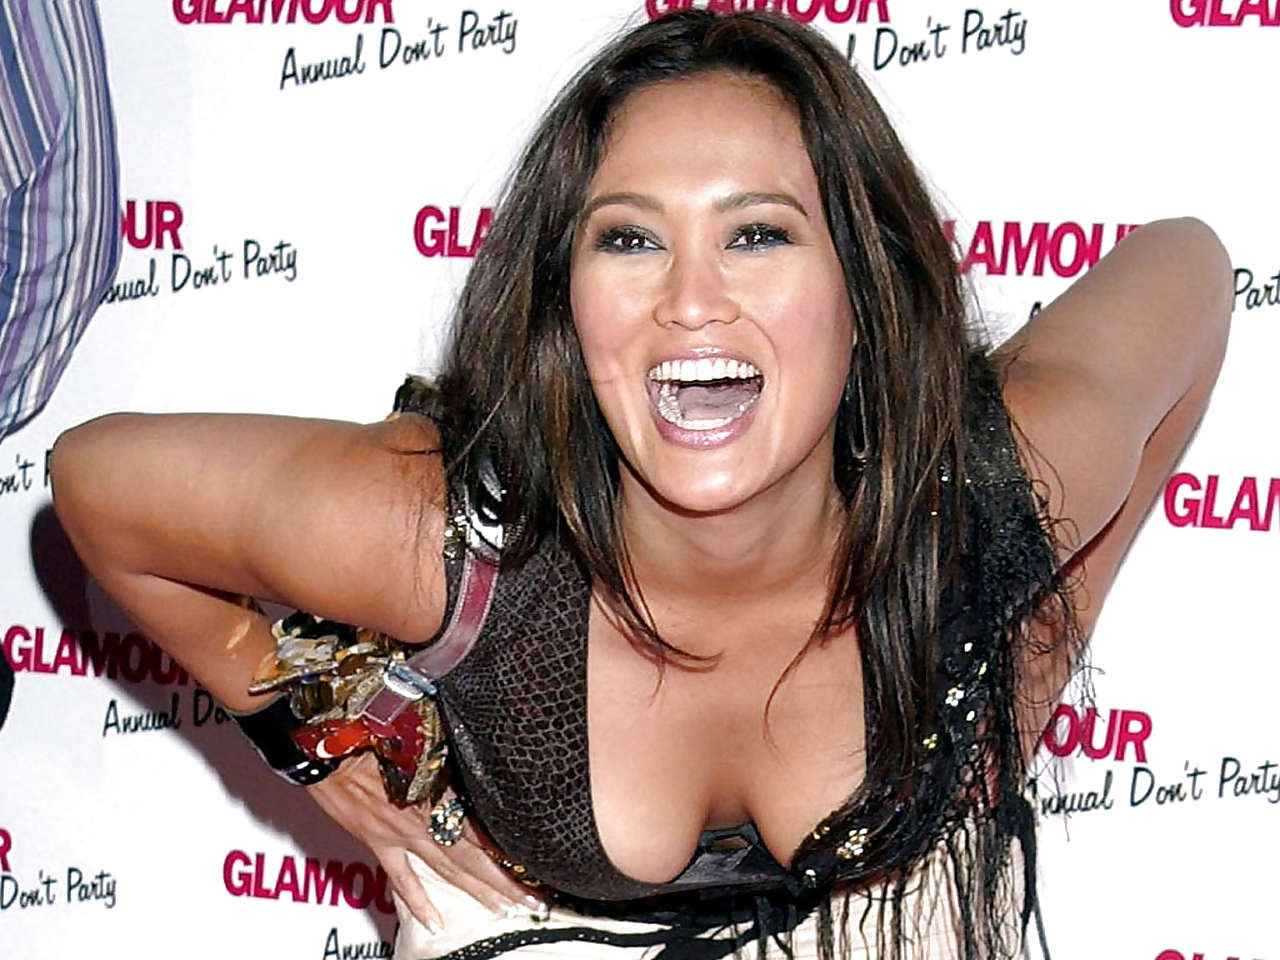 Tia Carrere Downblouse Paparazzi Pictures And Posing Sexy In Bikini